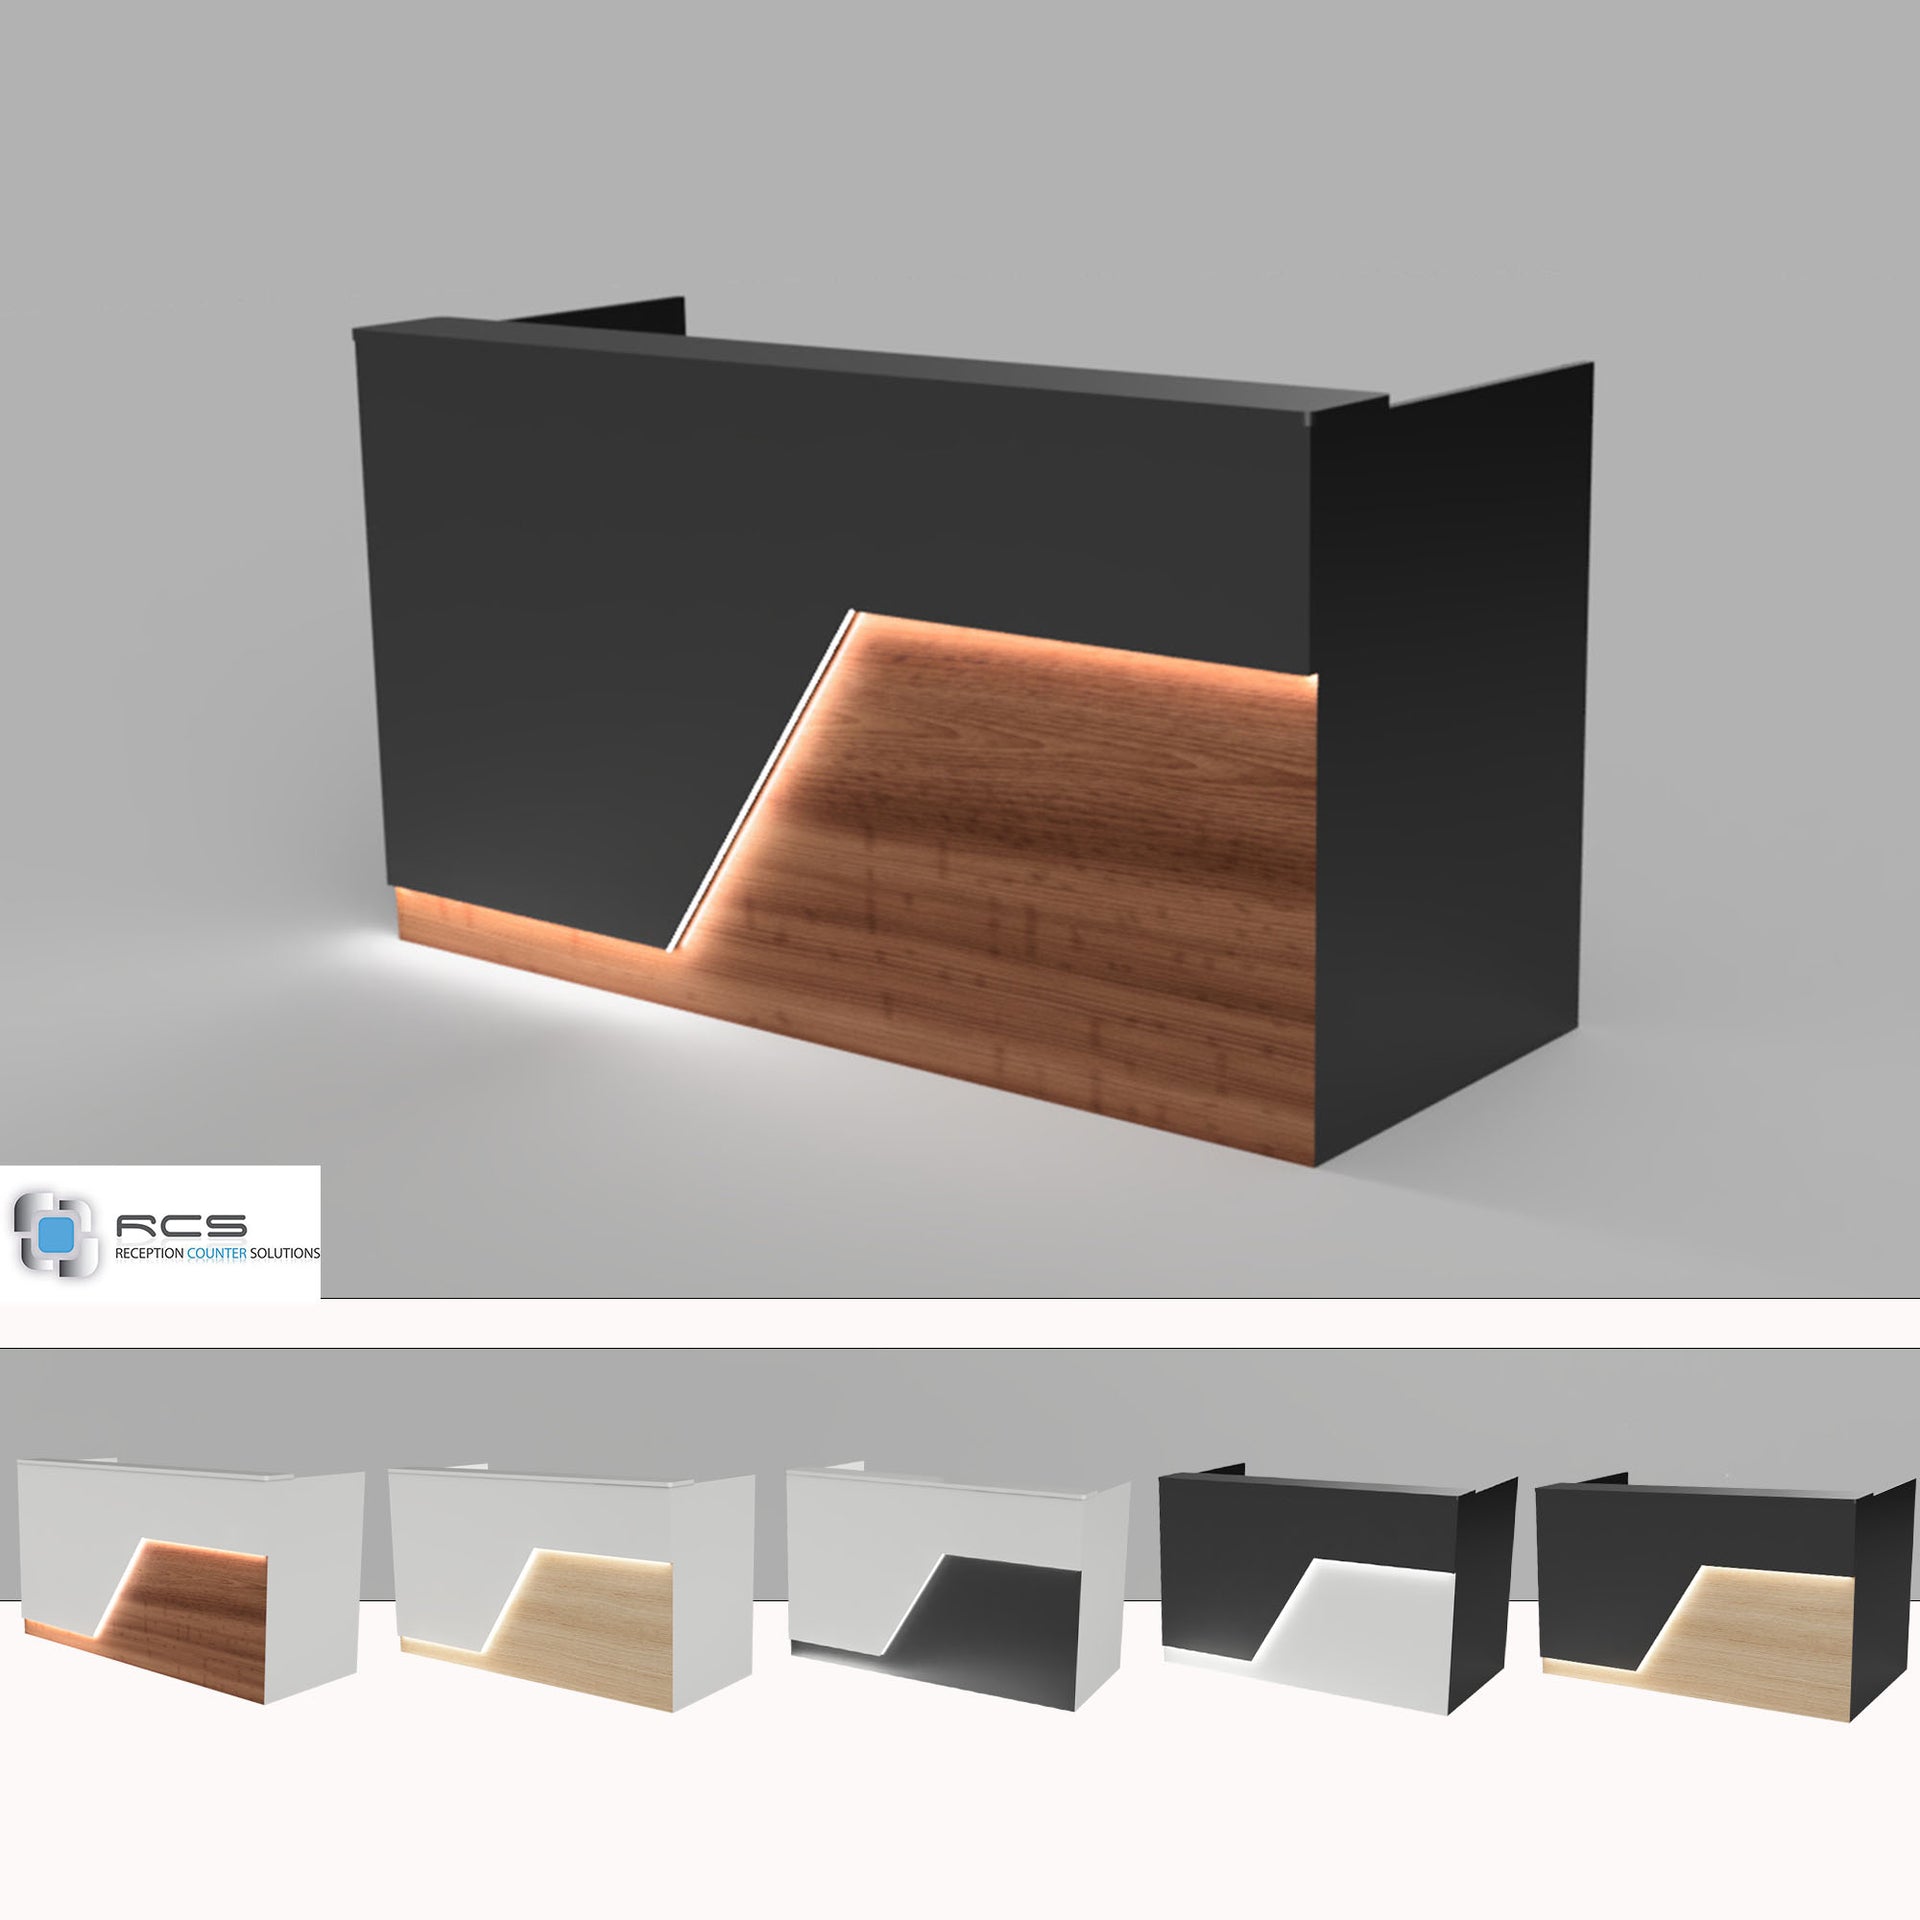 Reception Counter Solutions-Custom office furniture specialists